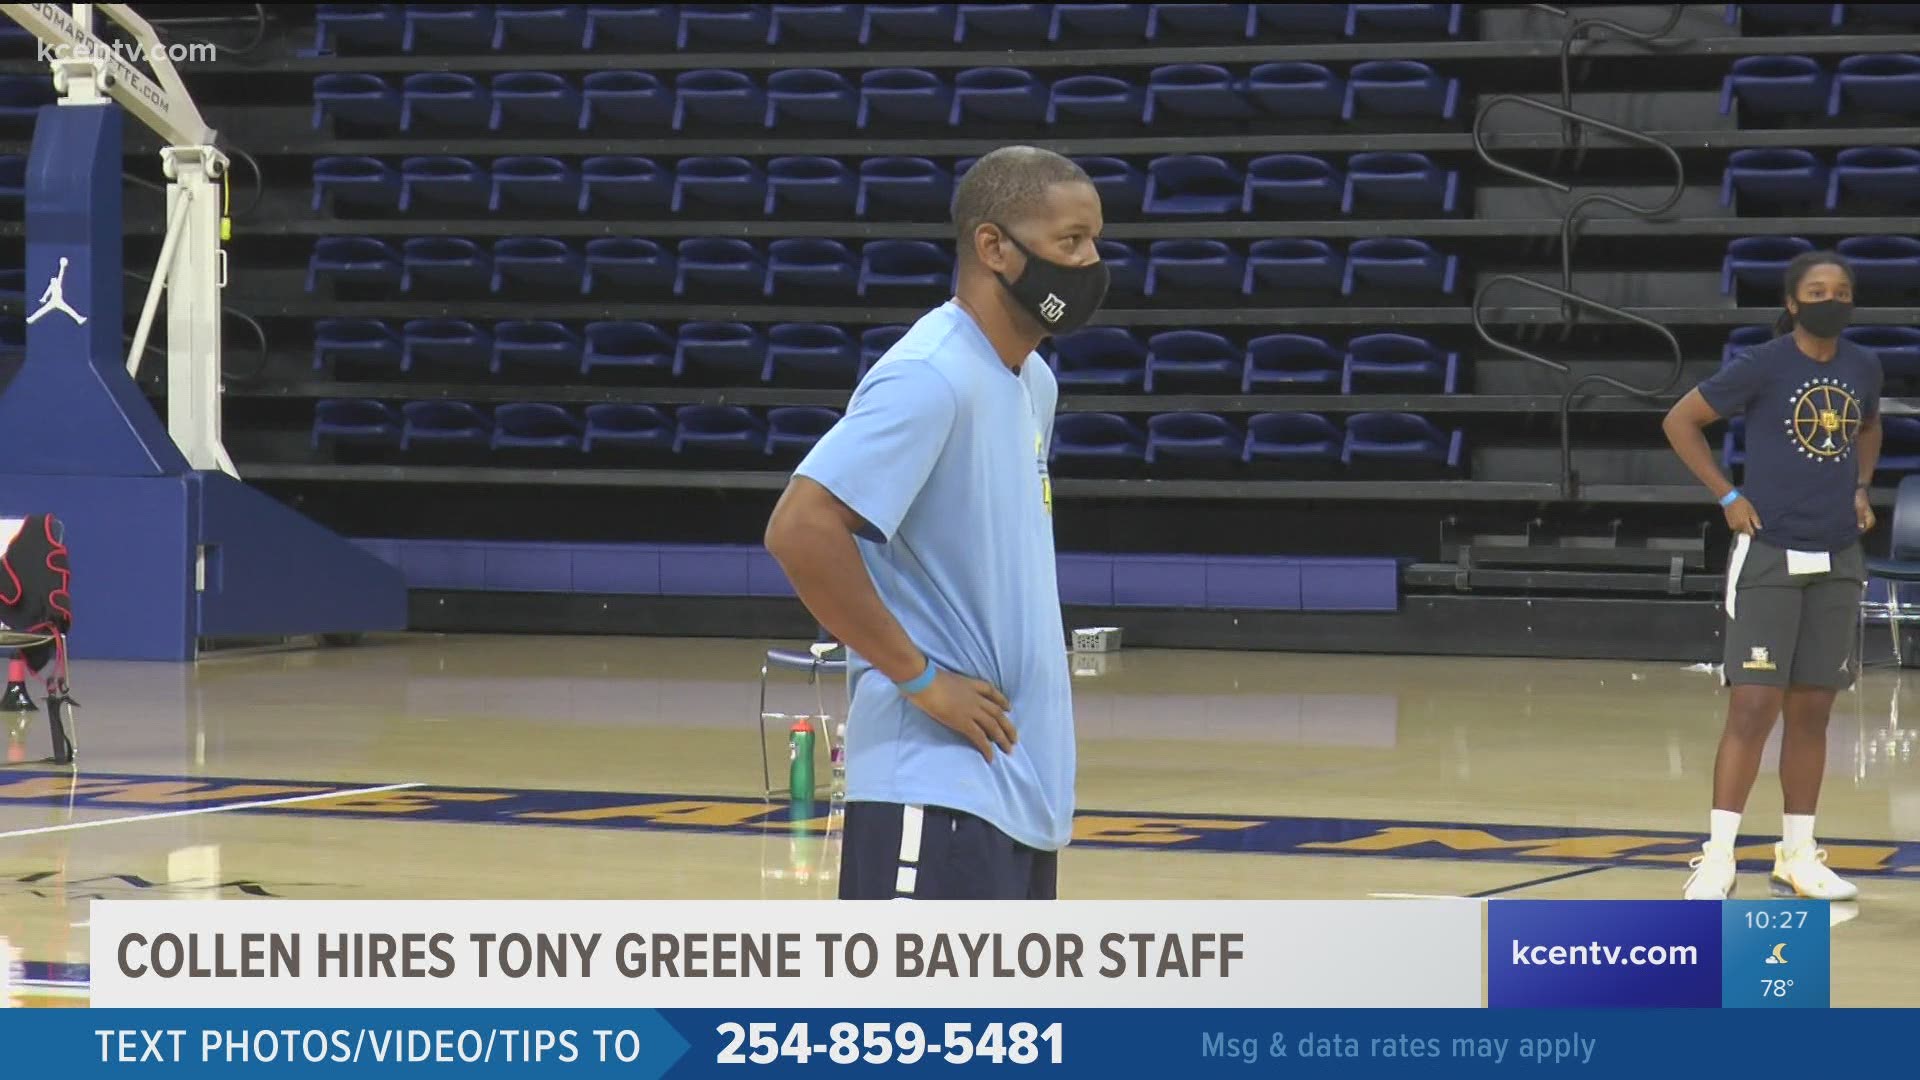 Tony Greene spent the past seasons at Marquette after two at Ole Miss.